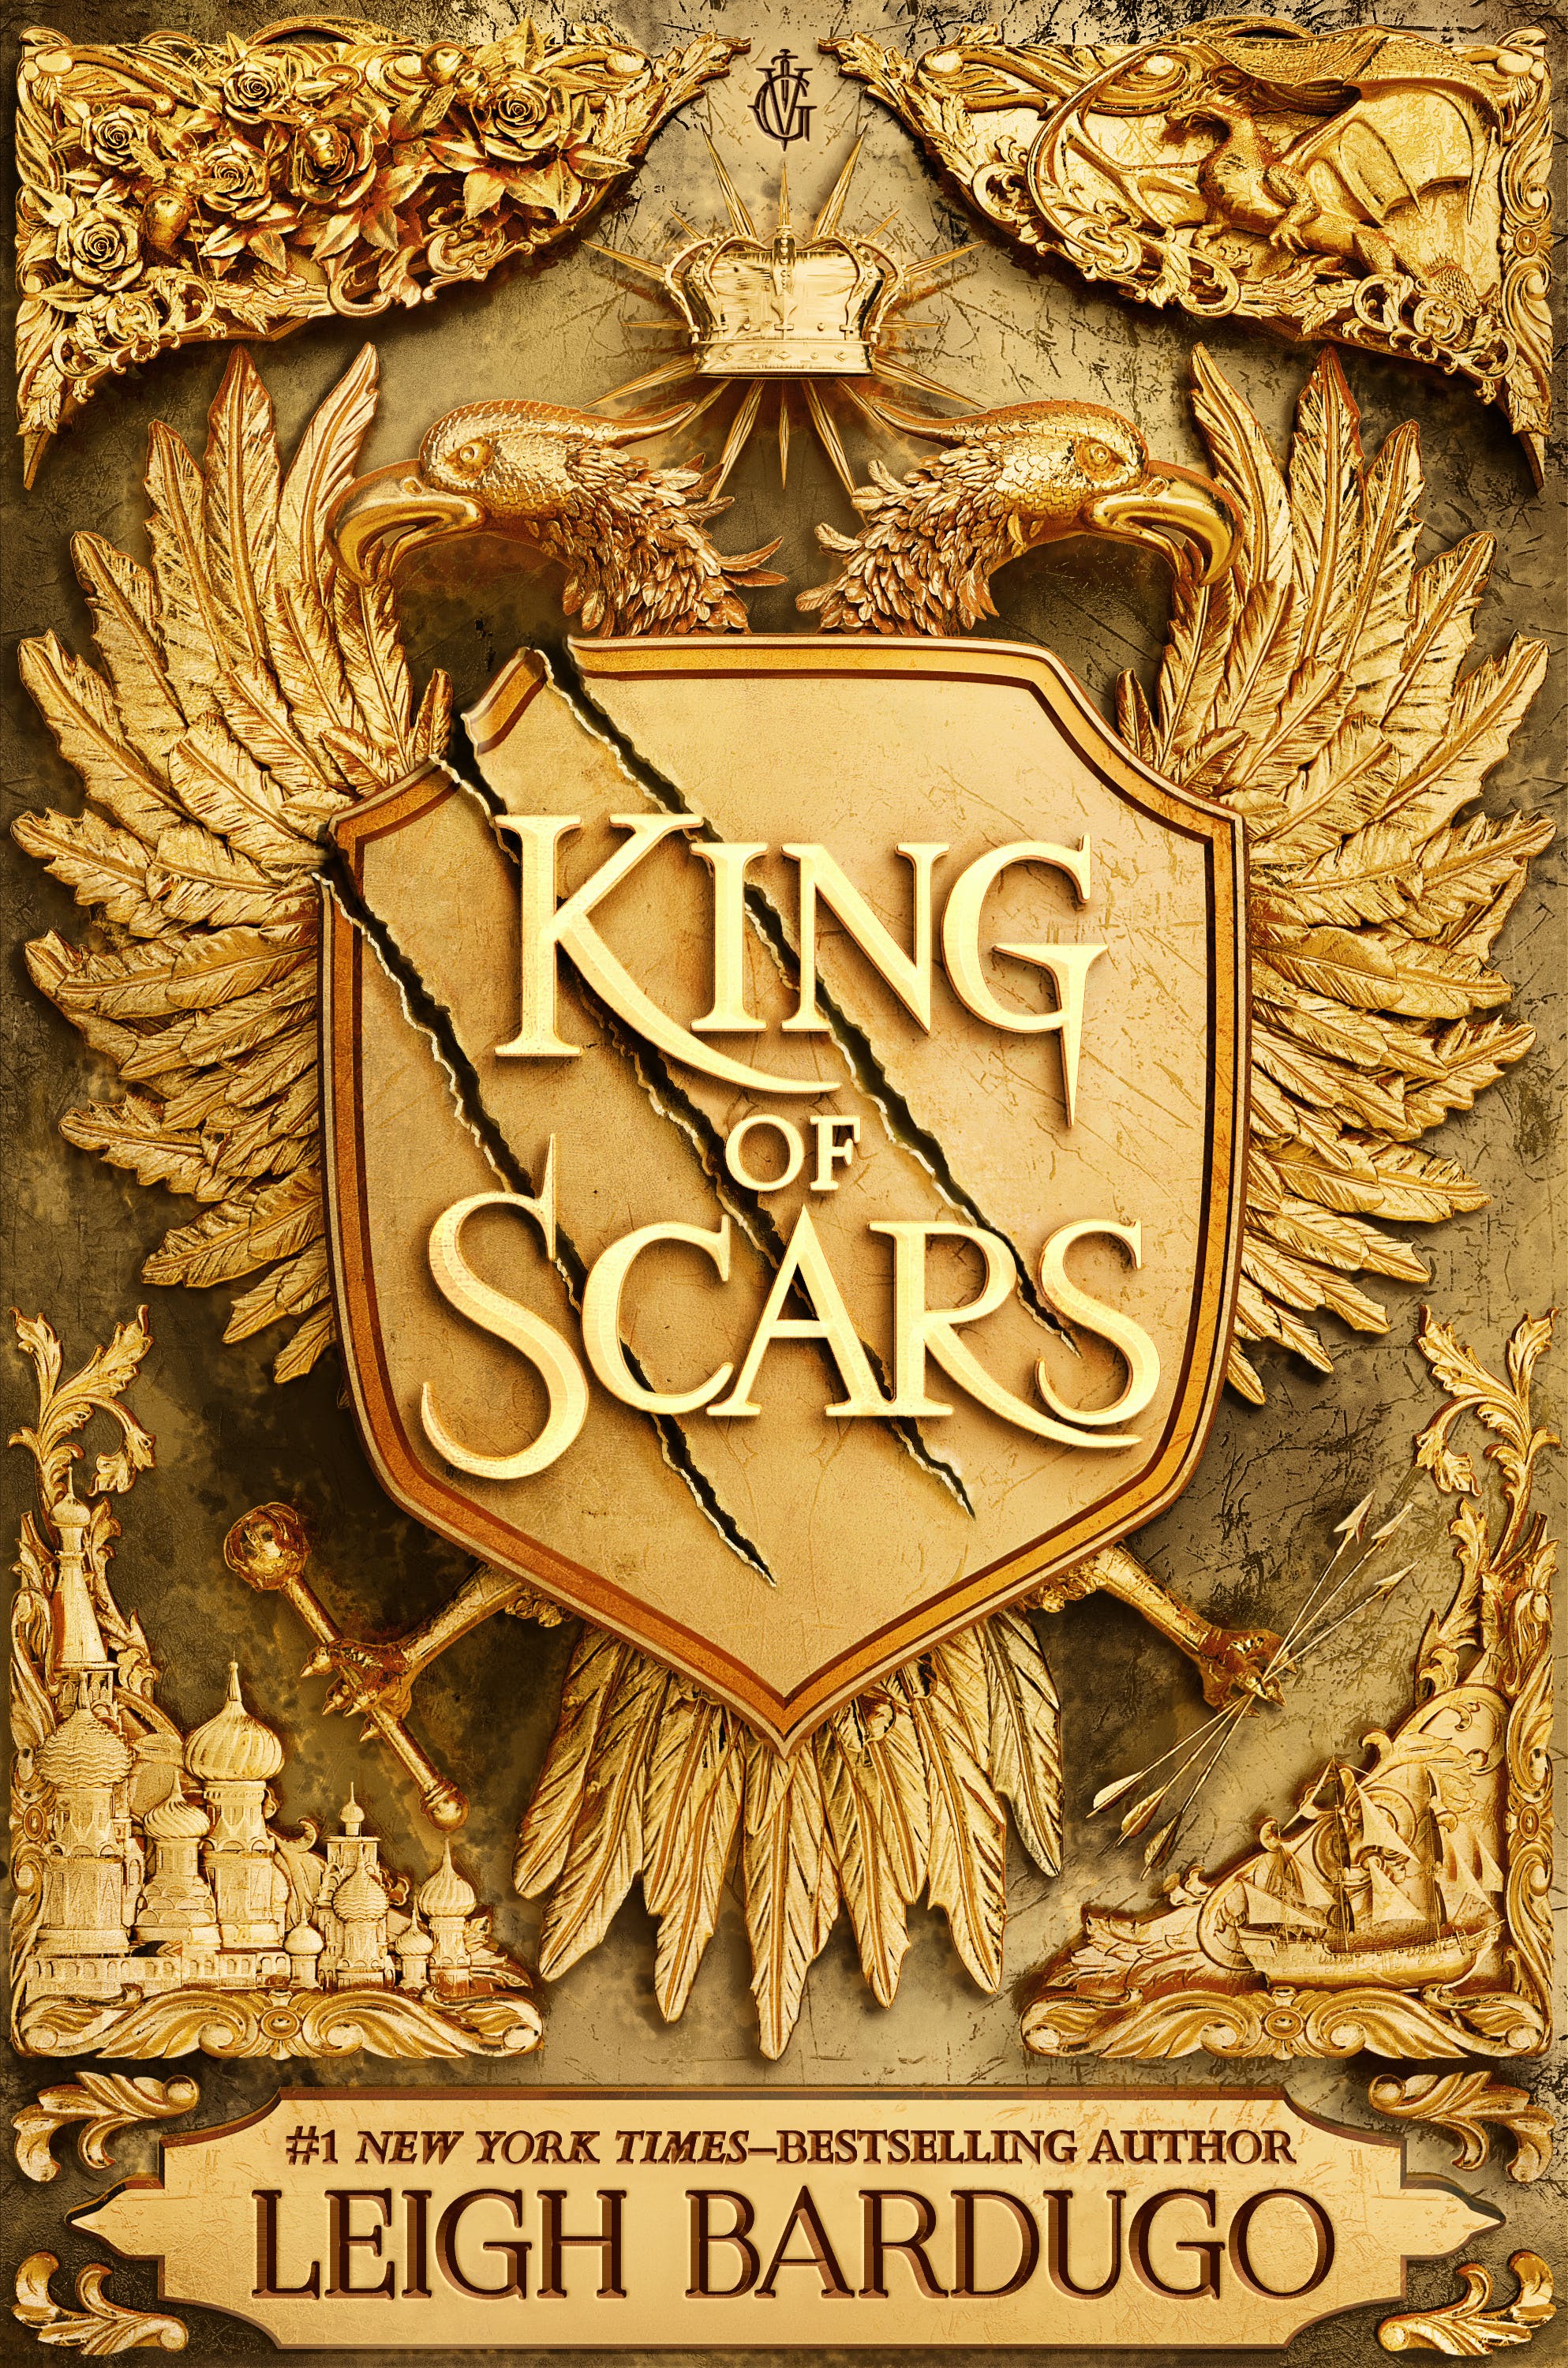 Bardugo Leigh King of Scars bardugo leigh rule of wolves king of scars book 2